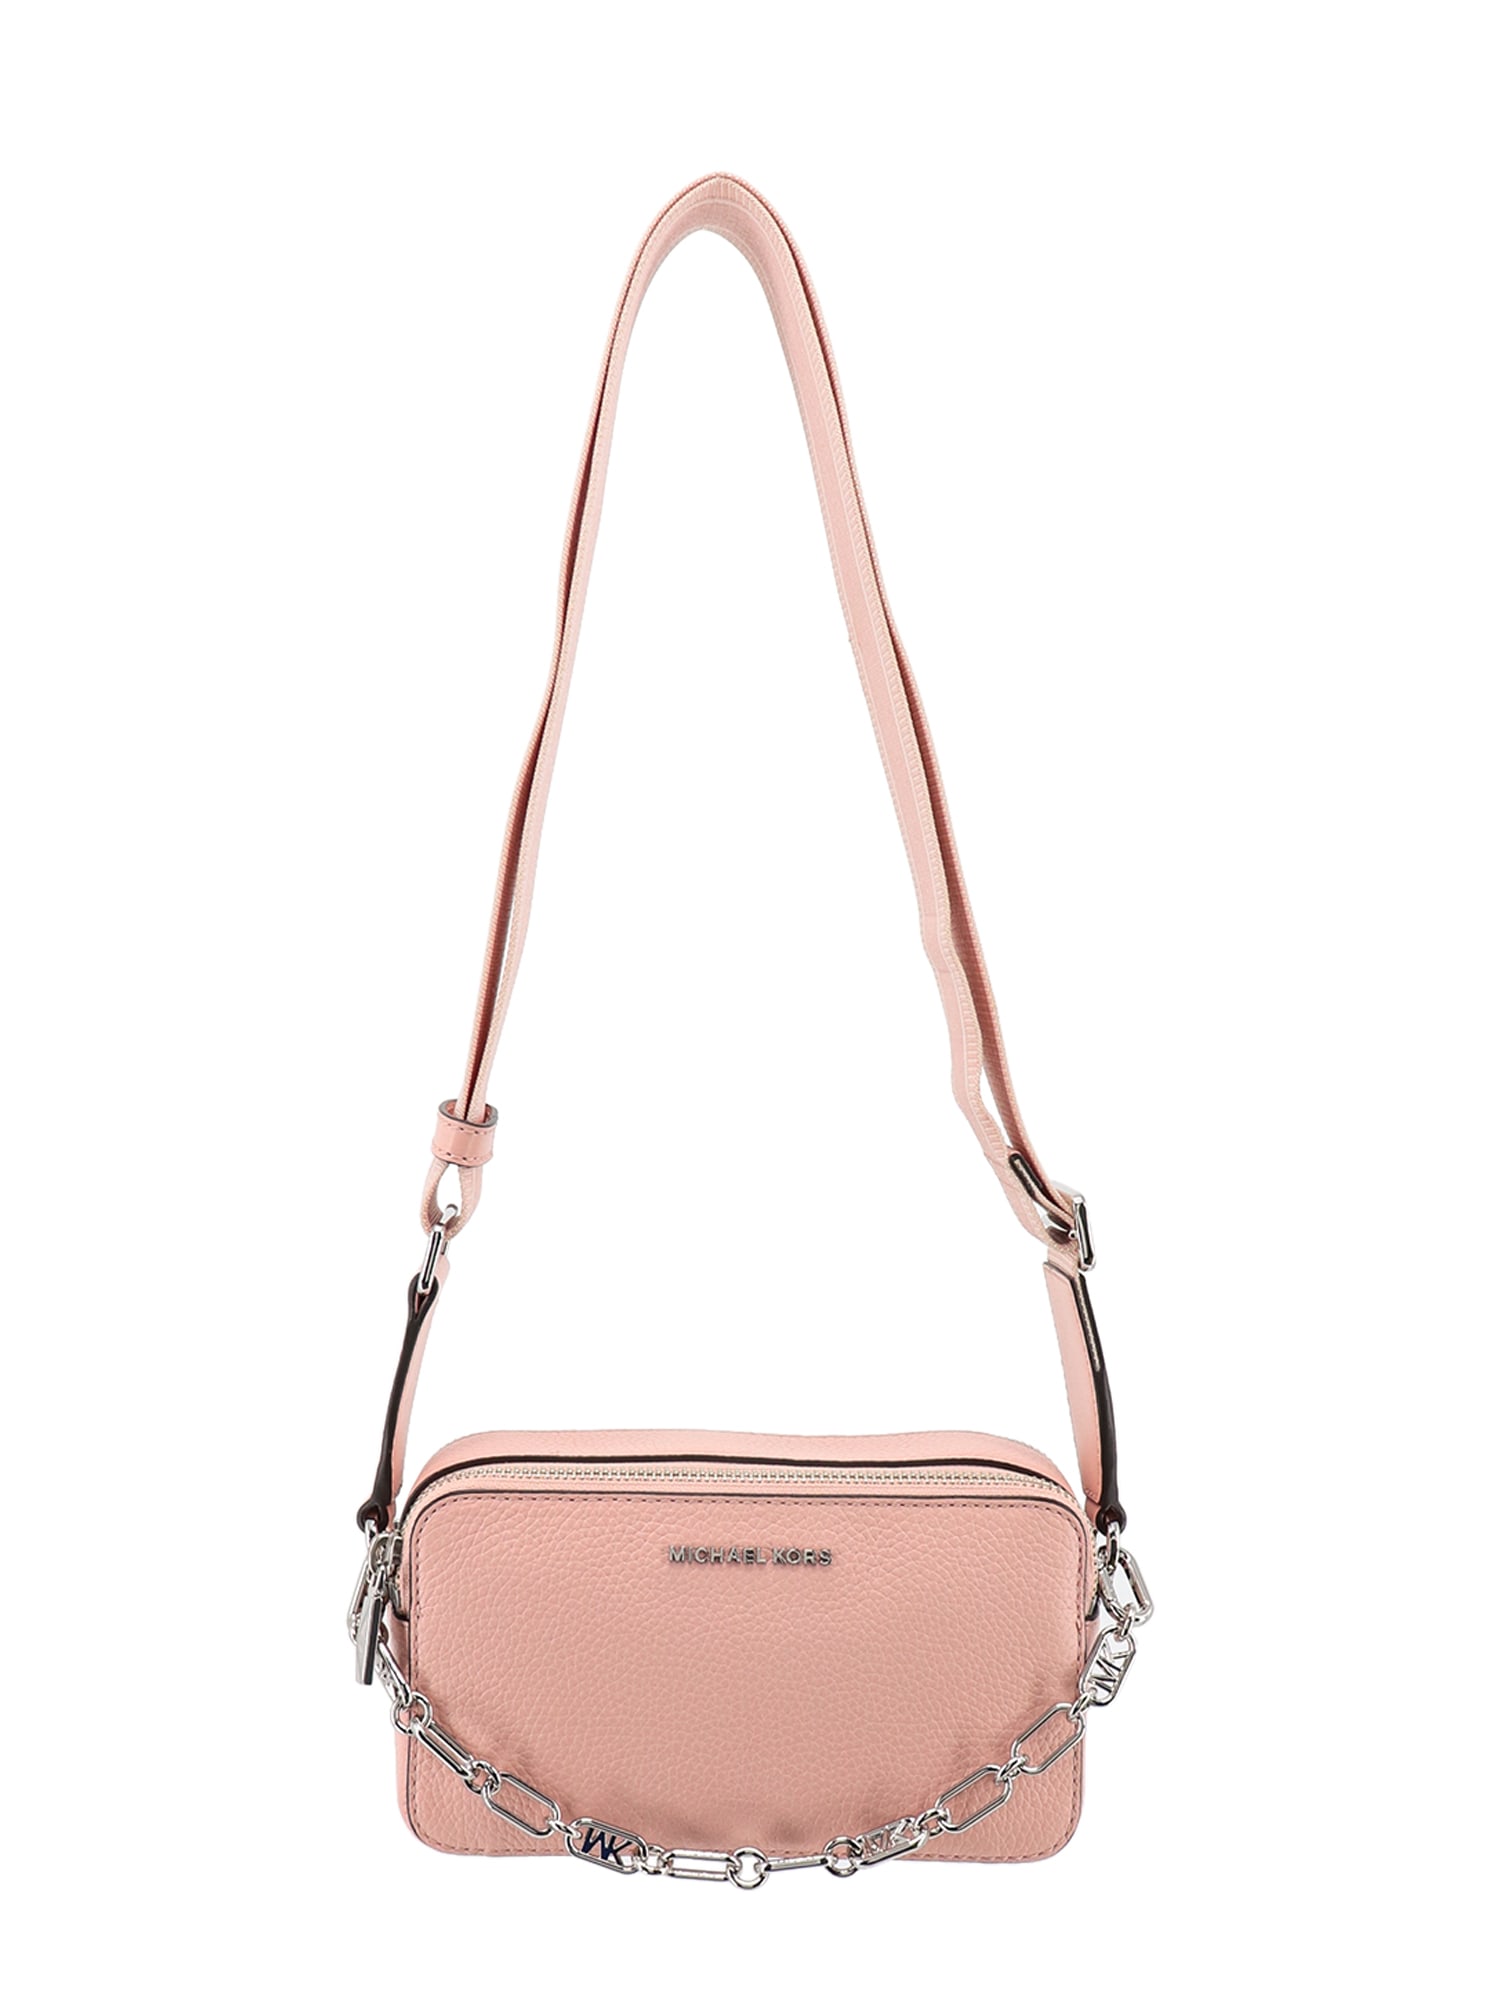 MICHAEL MICHAEL KORS PINK POUCH WITH CHAIN AND LOGO DETAIL IN HAMMERED LEATHER WOMAN